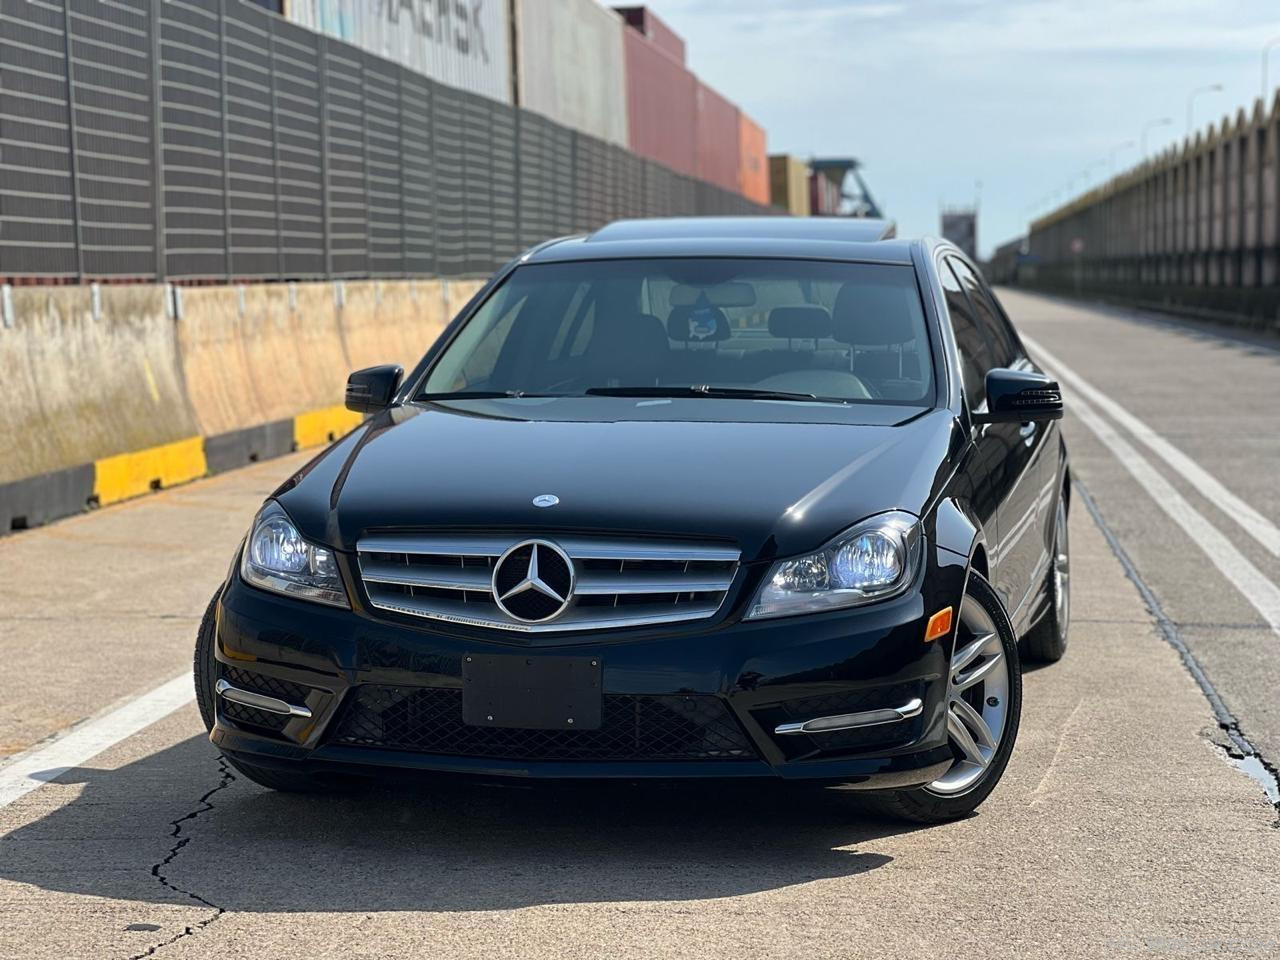 ✅MERCEDES-BENZ C300 AMG PACKAGE